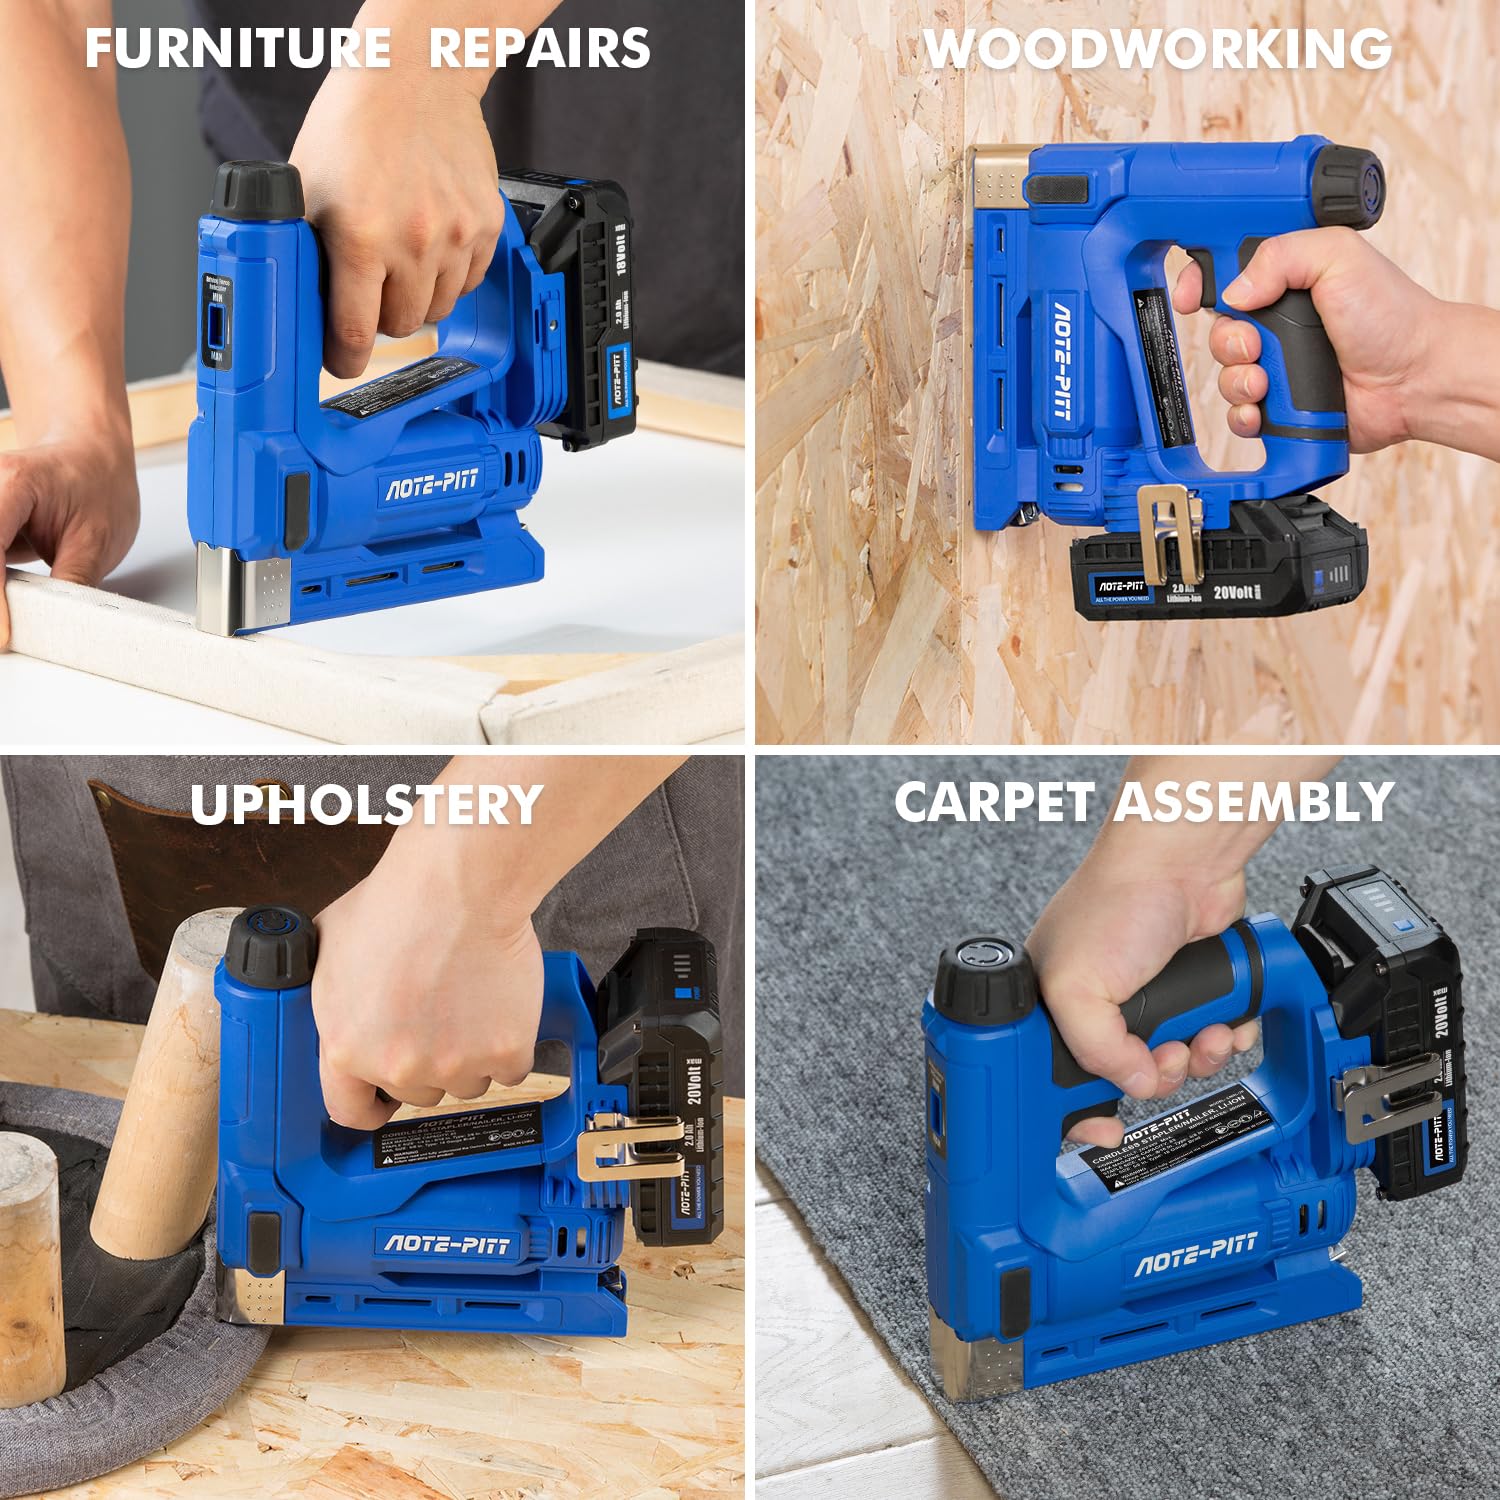 AOTE-PITT 20V Cordless Brad Nailer Drive 5/8'' Nails, 2 in 1 Staple Gun Nail Gun Battery Powered, 2.0Ah Electric Stapler 3/8" Crown Include Battery and Charger, Ideal for Upholstery, Woodworking